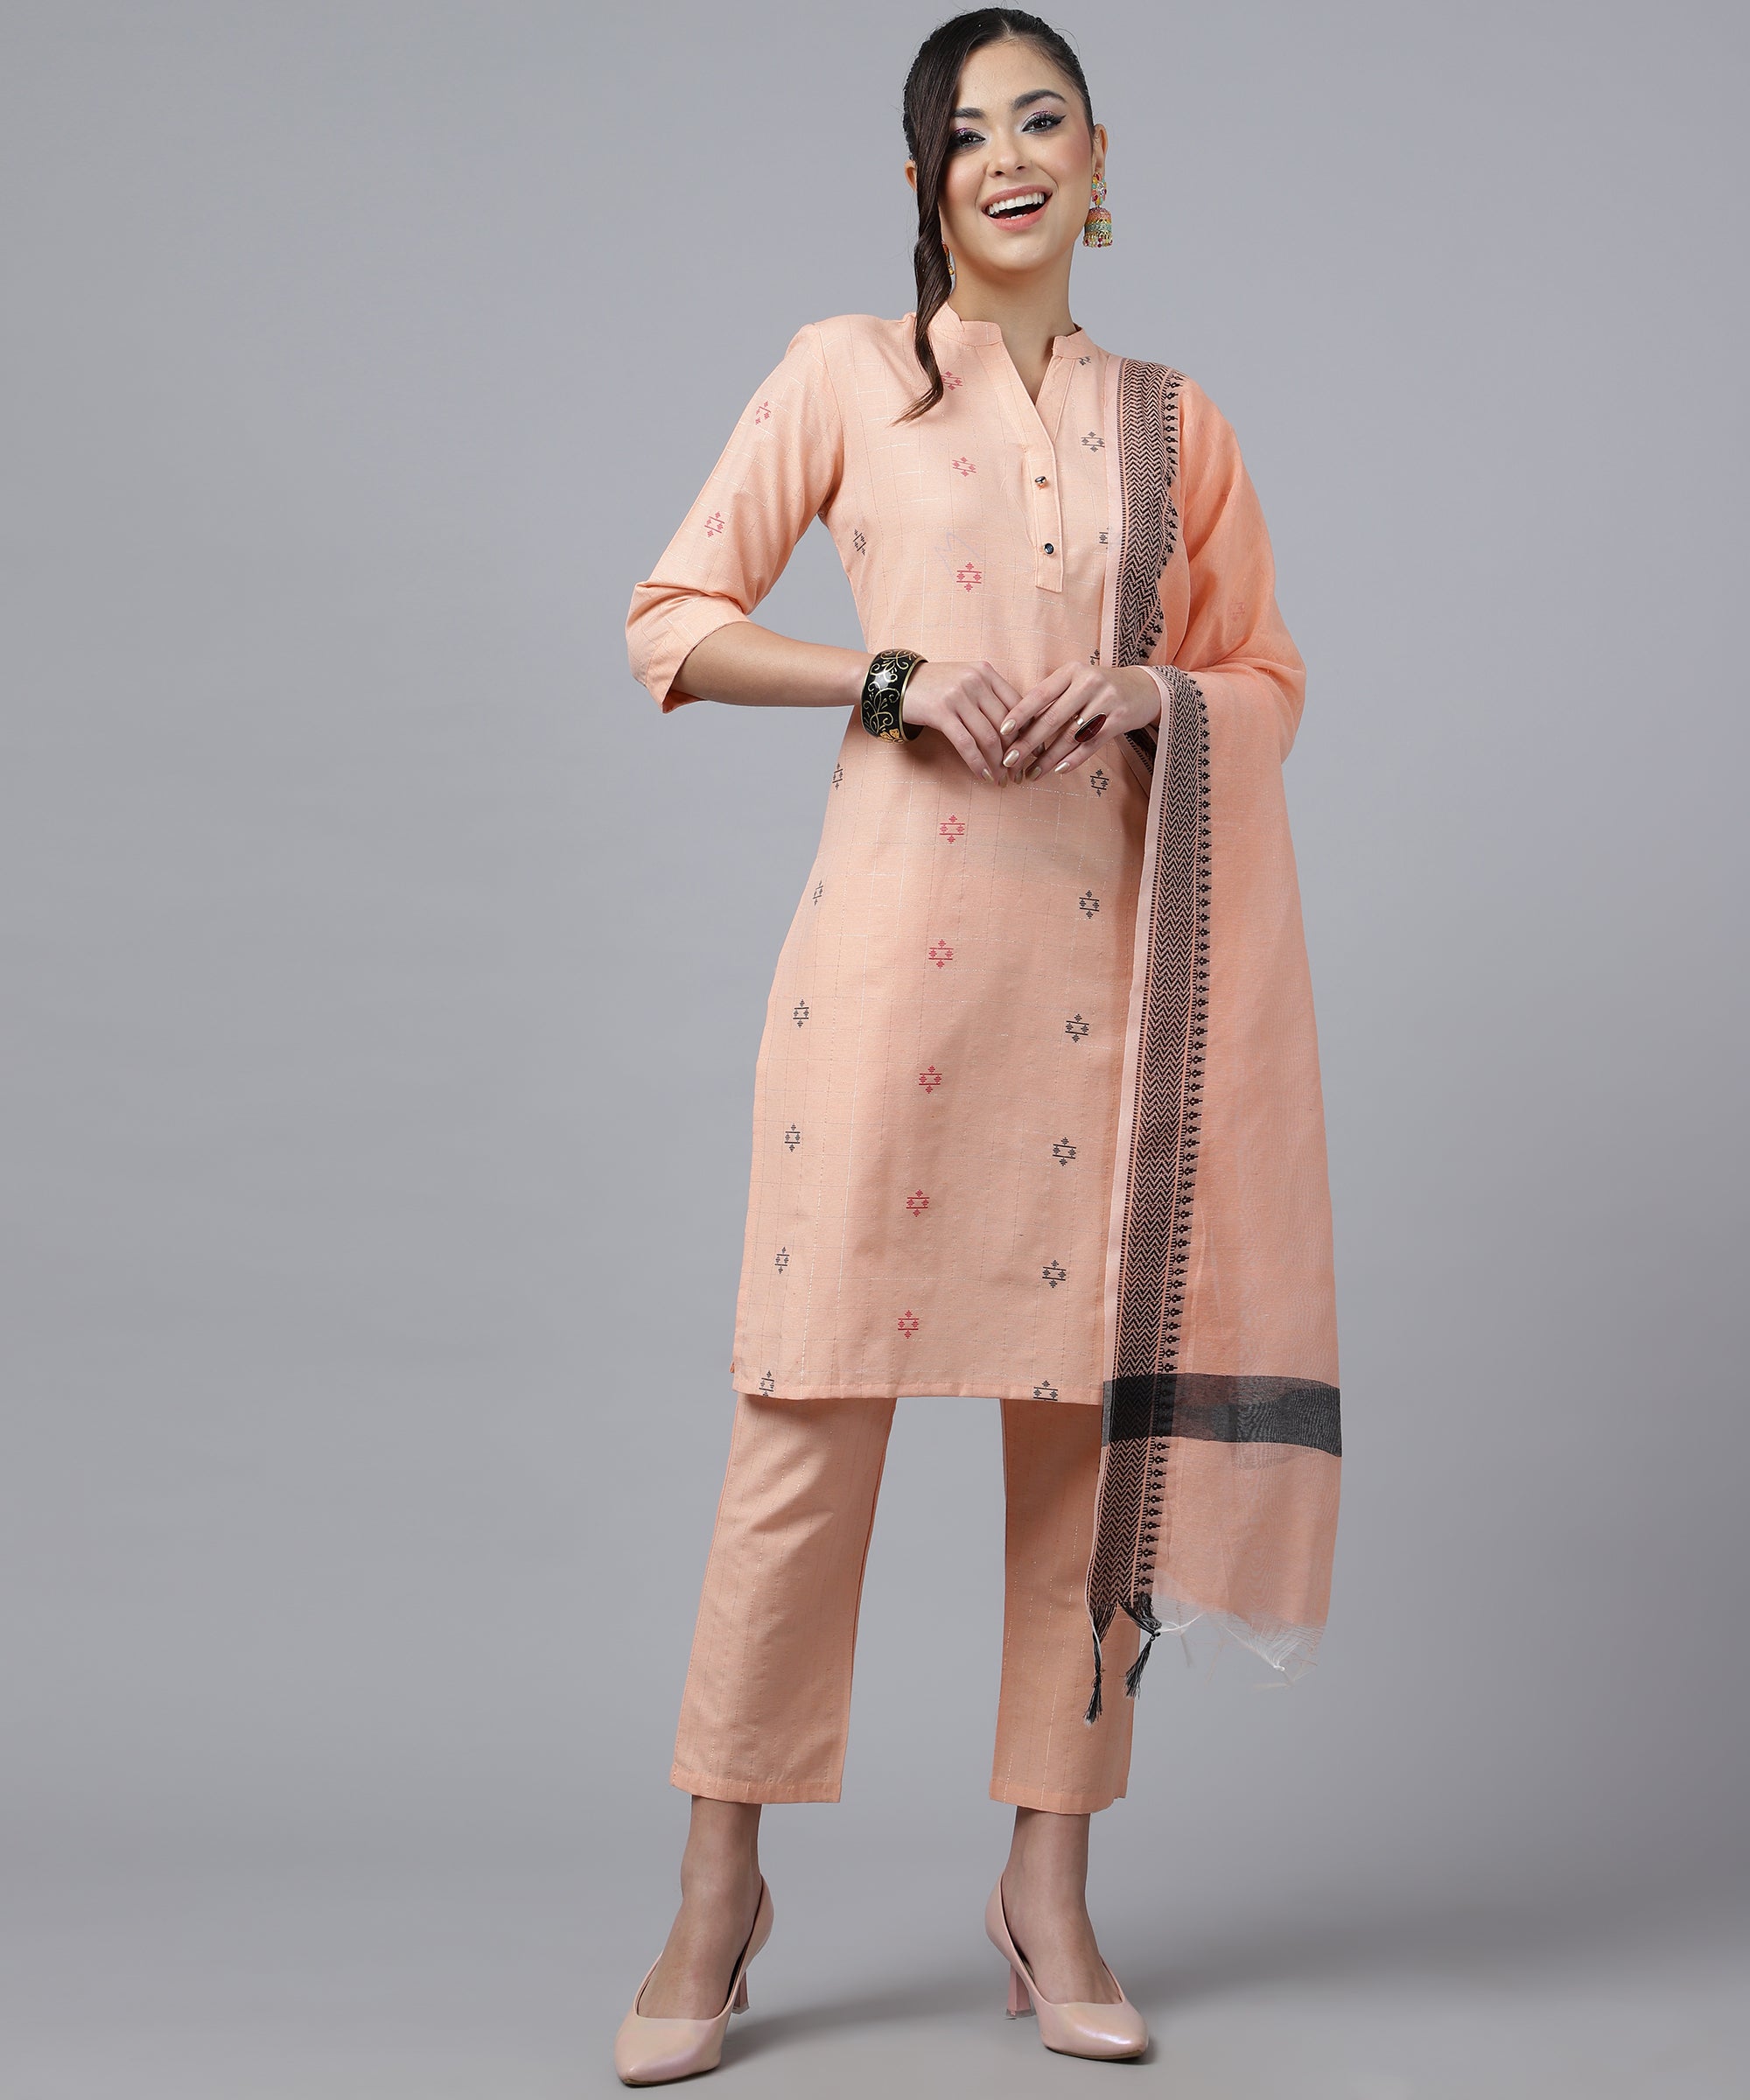 Buy Ready to Wear Kurti Peach Color with Black Bottom (X-Large) at Amazon.in